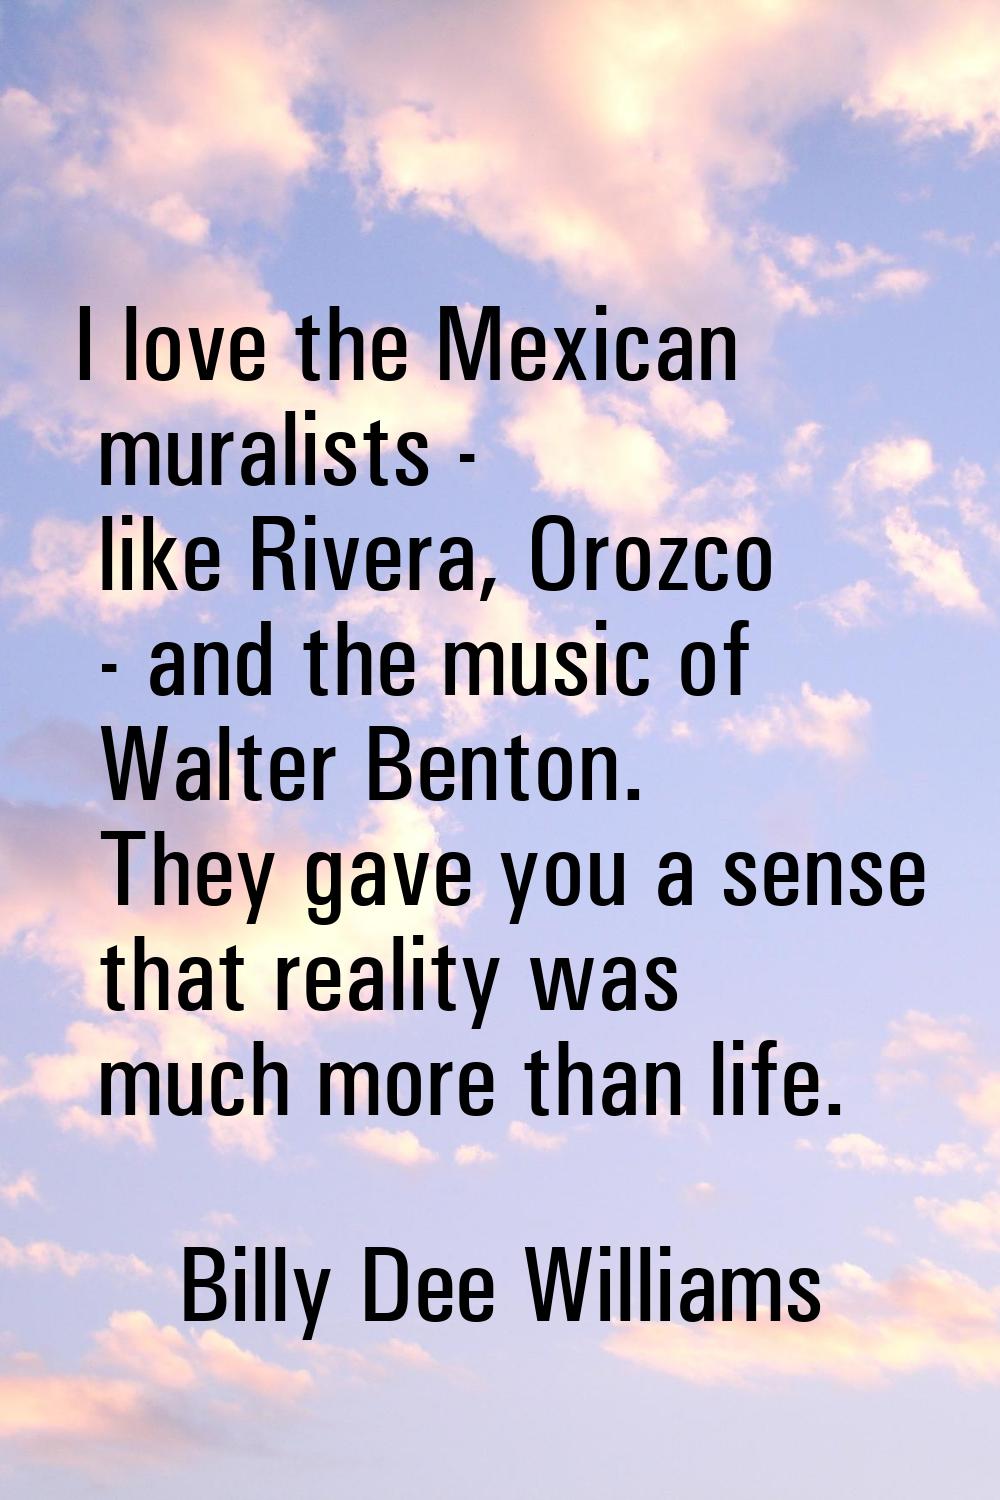 I love the Mexican muralists - like Rivera, Orozco - and the music of Walter Benton. They gave you 